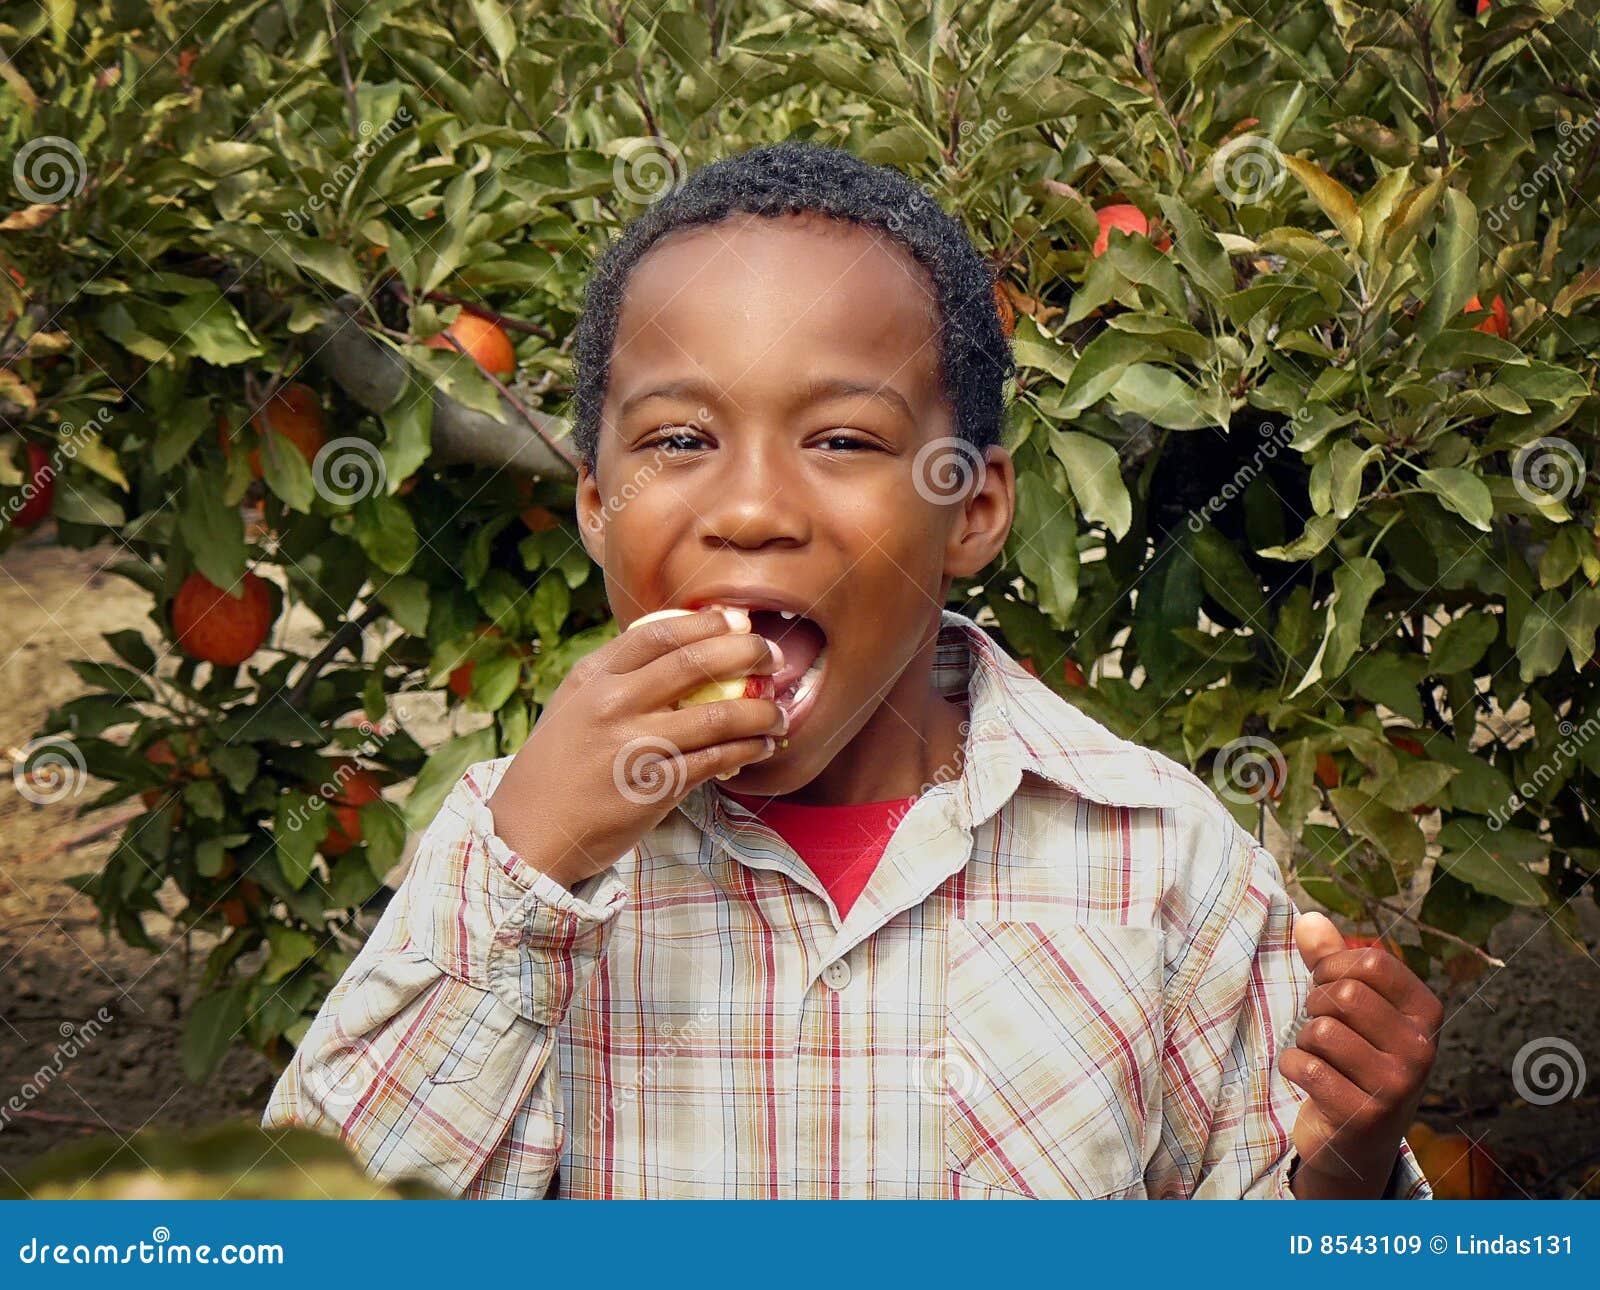 african american boy eating an apple in an orchard